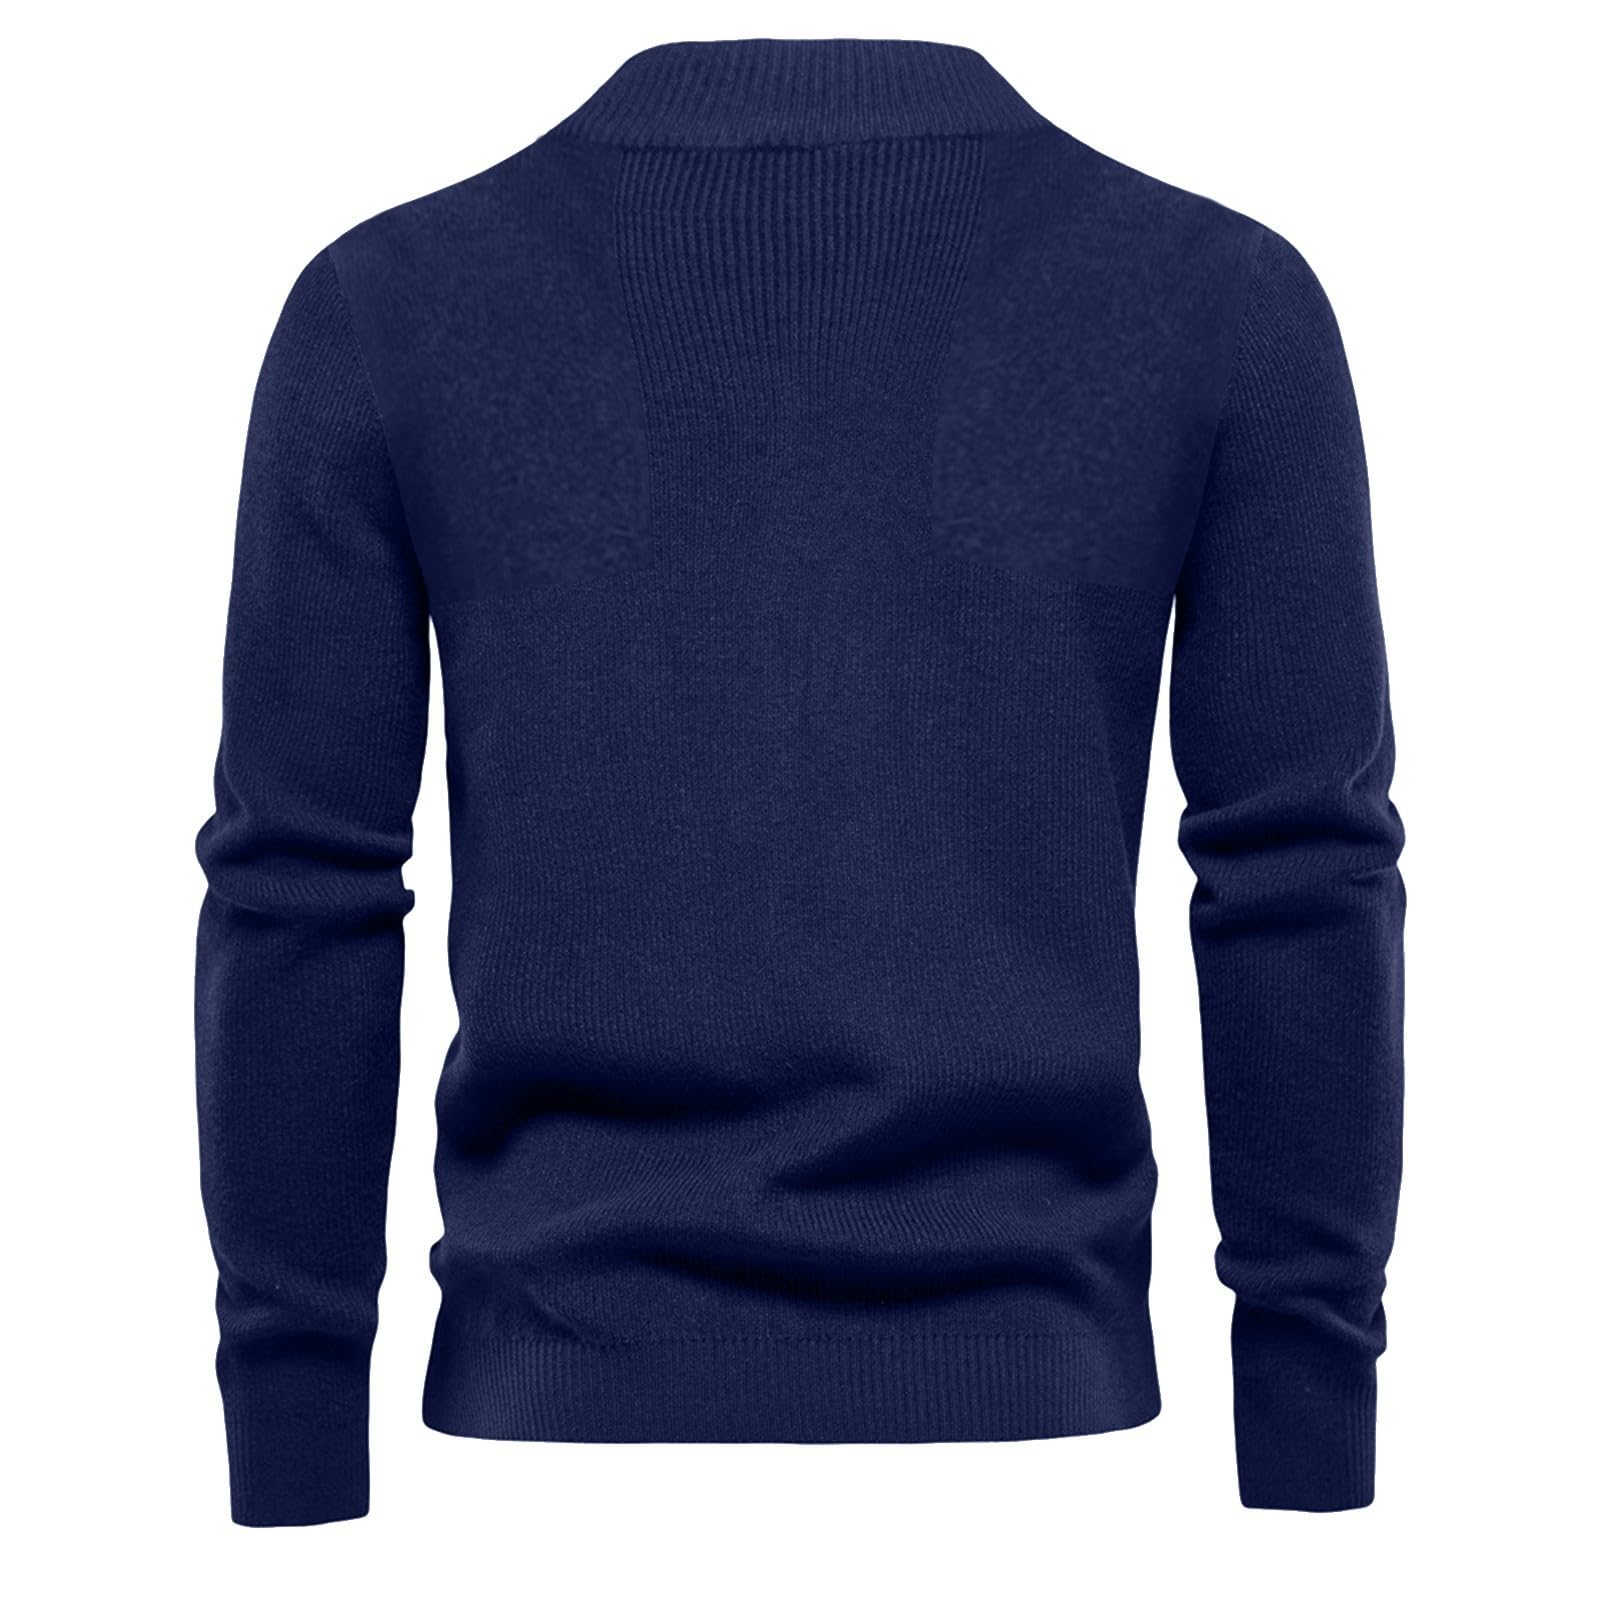 XIAXOGOOL Men's Sweaters Quarter Zip Pullover Solid Color Basic V Neck Loose Knit Jumper Casual Comfort Sweater Pullovers